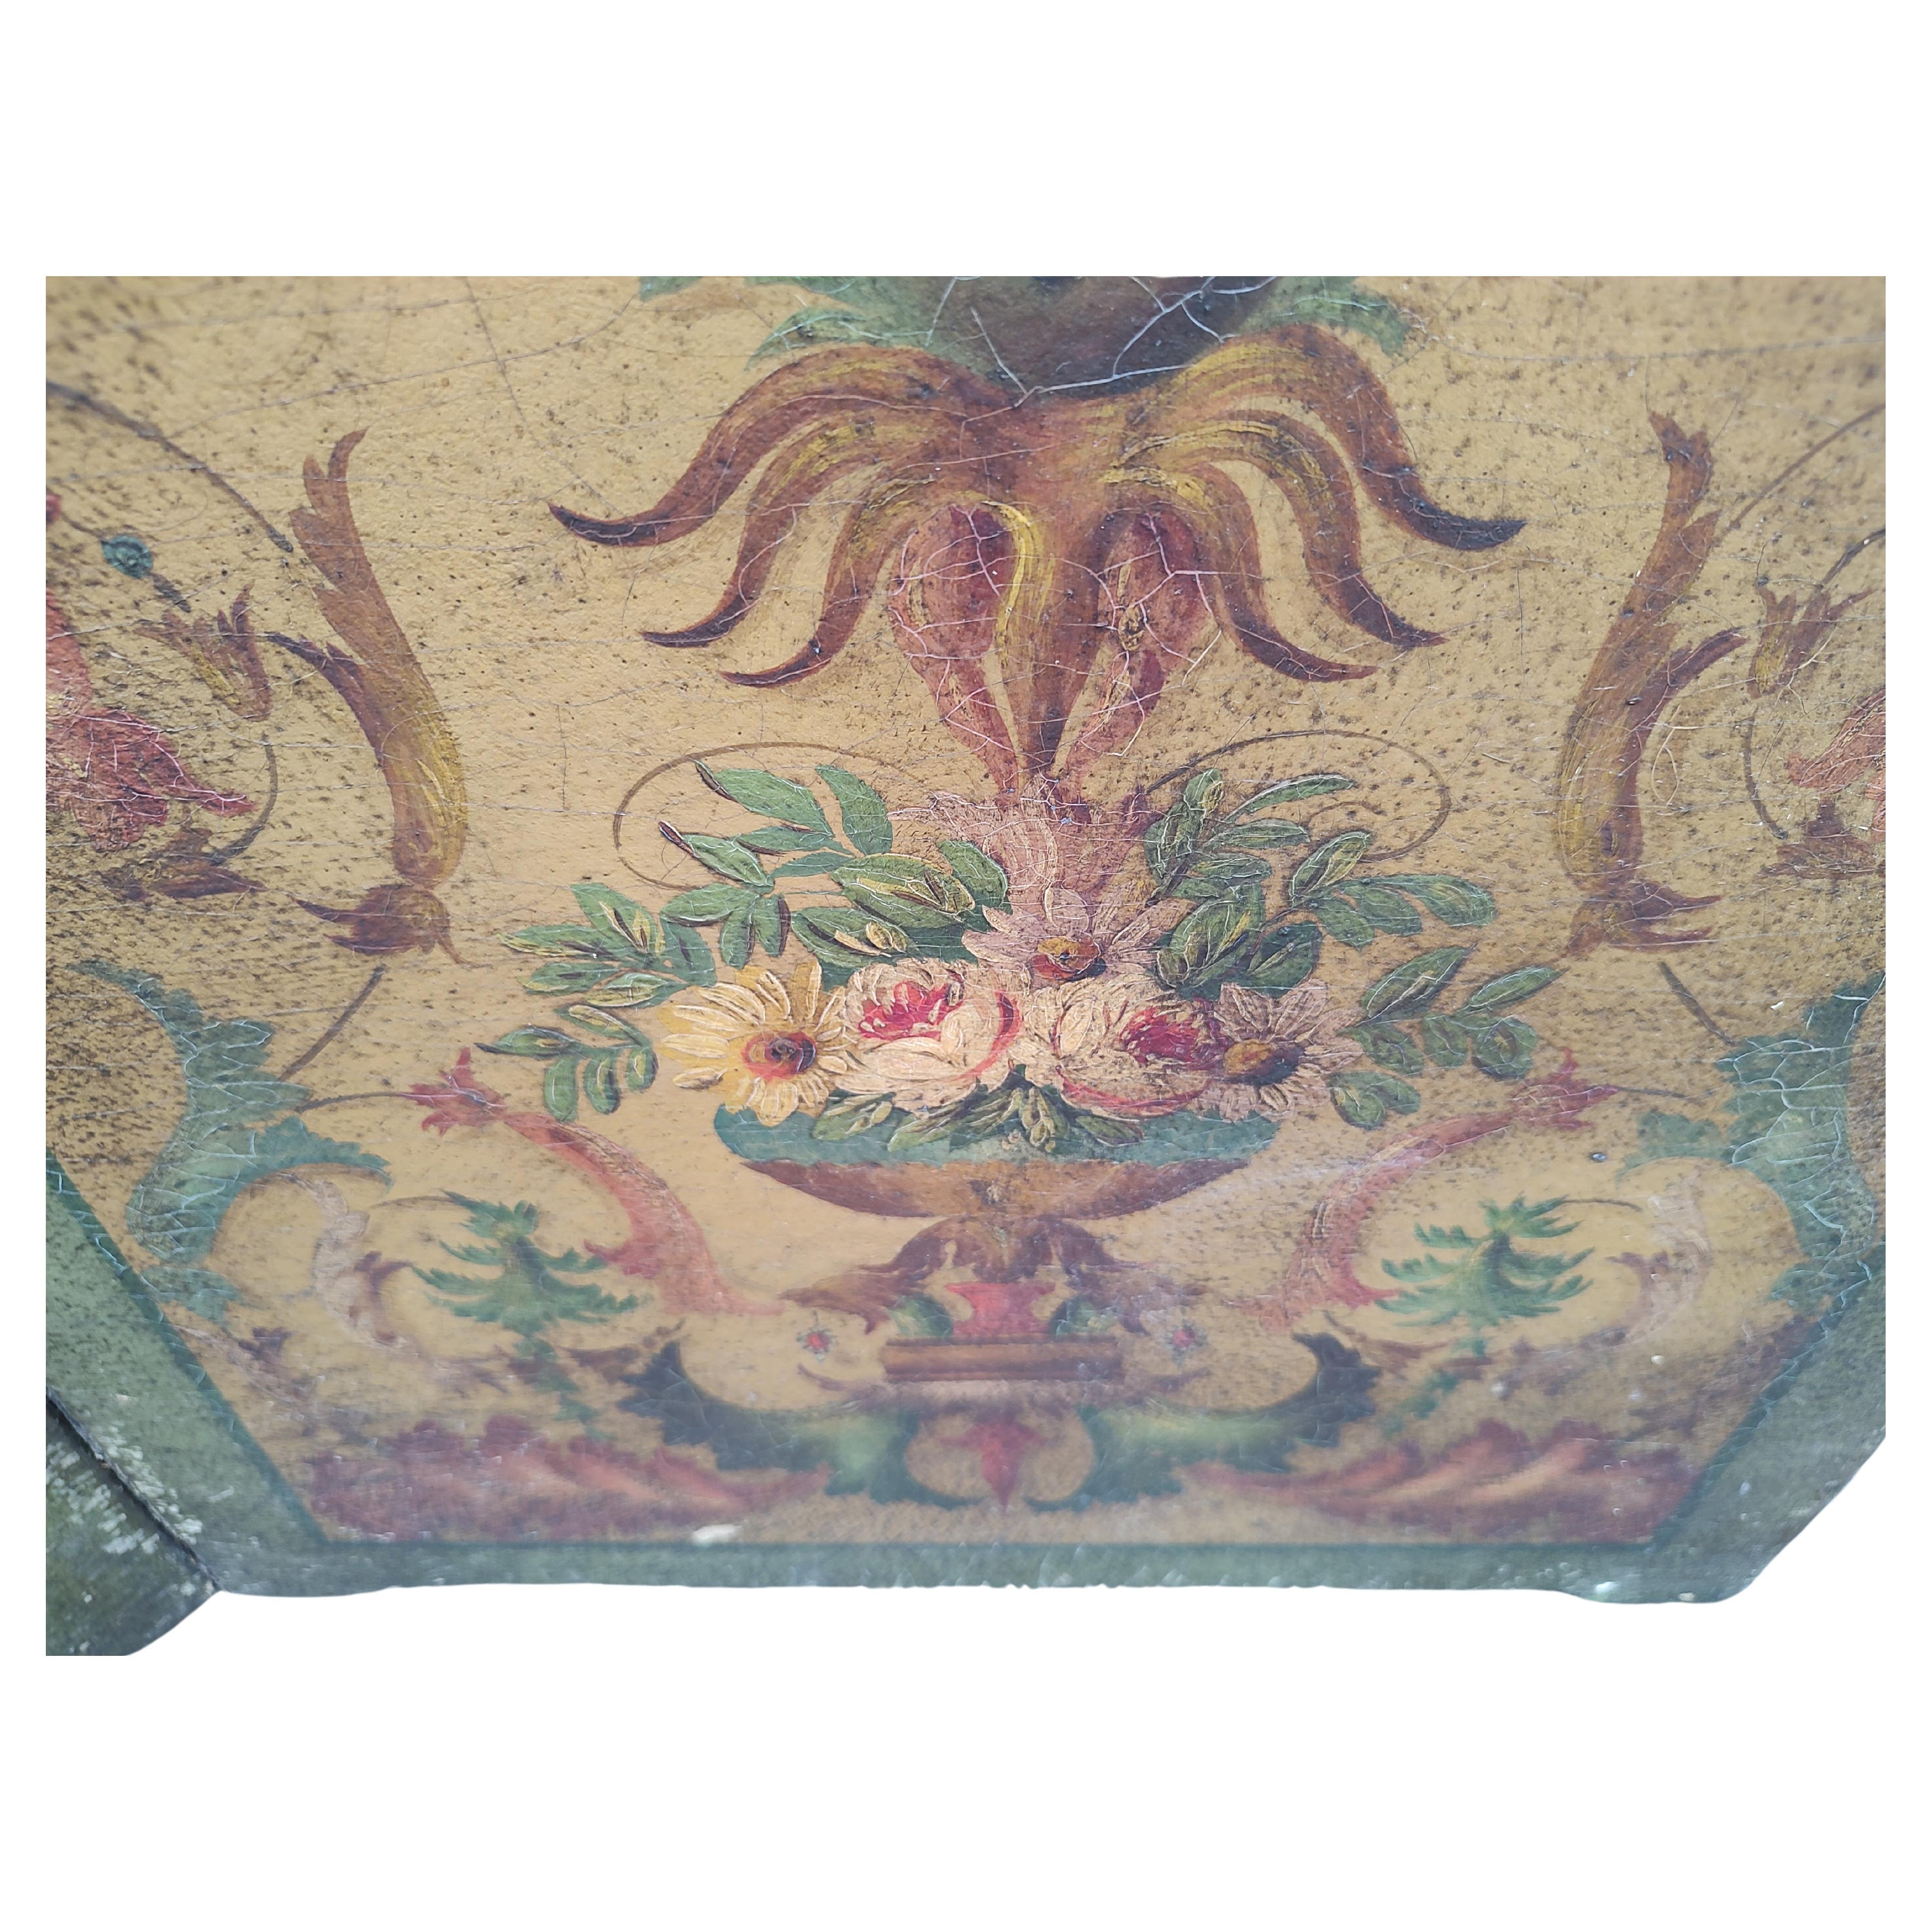 Fantastic leather four panel room divider hand painted and hand crafted screen from the latter part of the 19th century France. Hand painted cherubs with floral accents in outstanding colors with detailed craftsmanship. One back panel was replaced